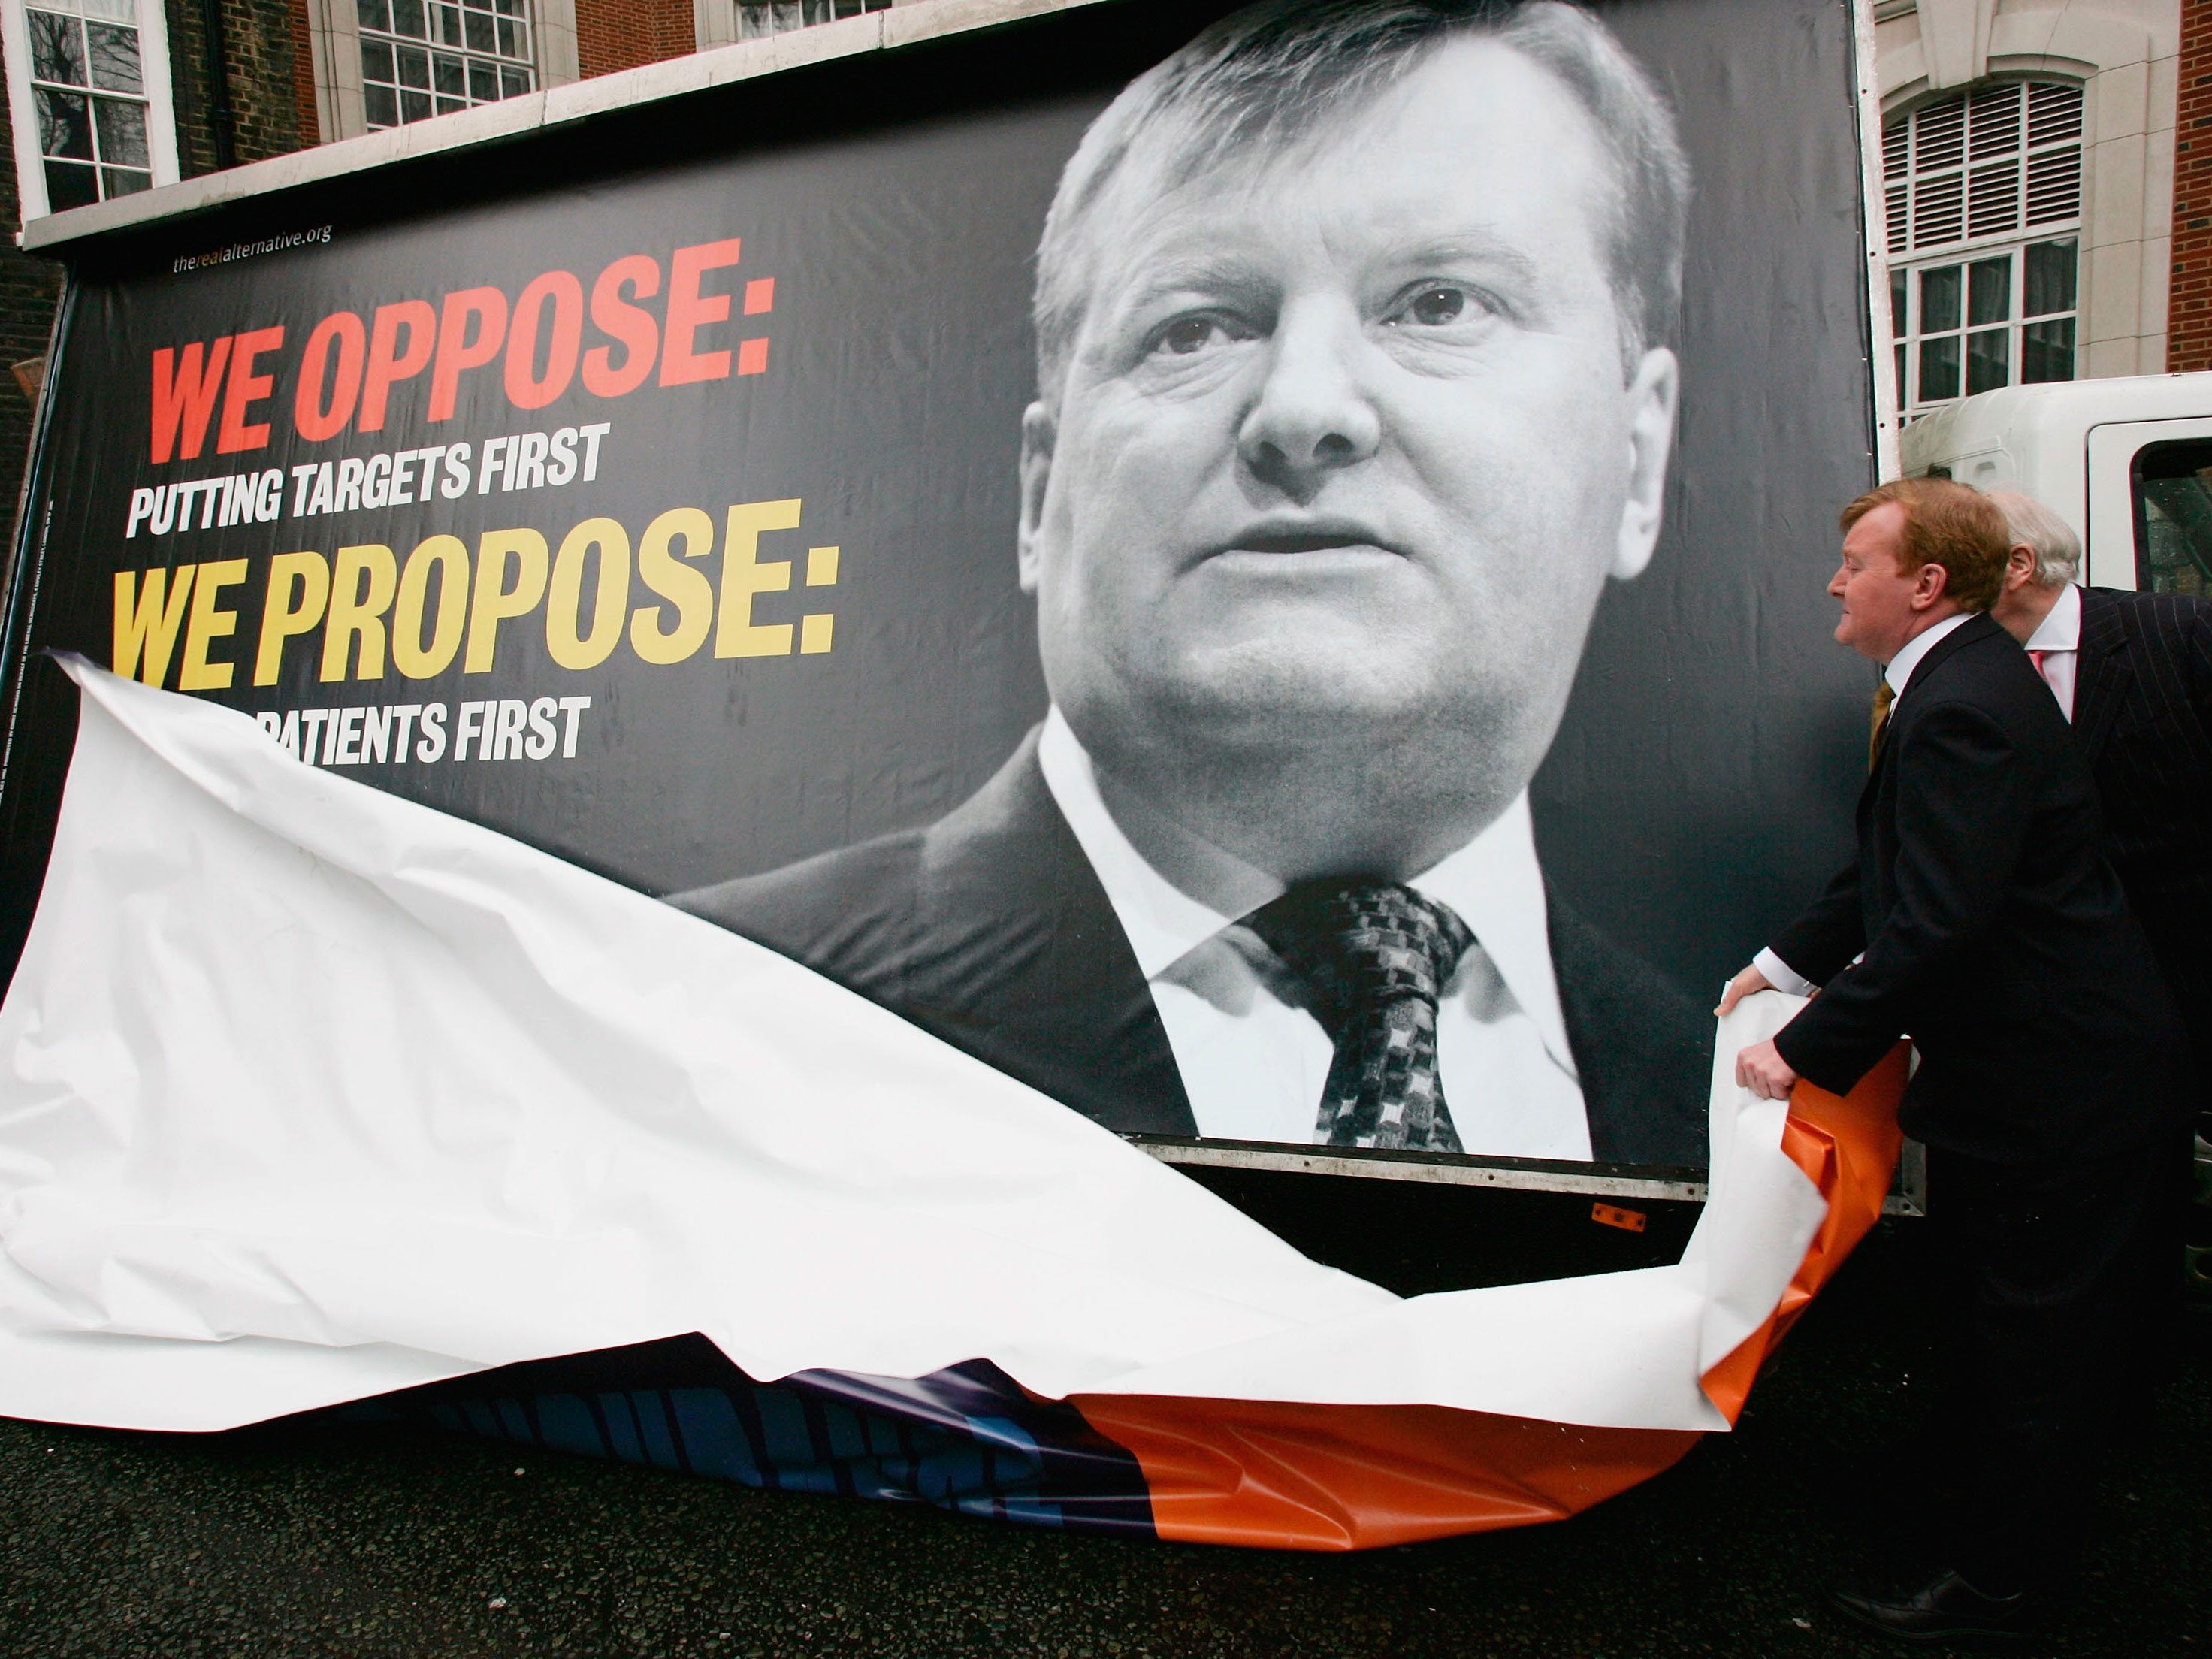 Charles Kennedy unveiling a Lib Dem campaign poster ahead of the 2005 general election